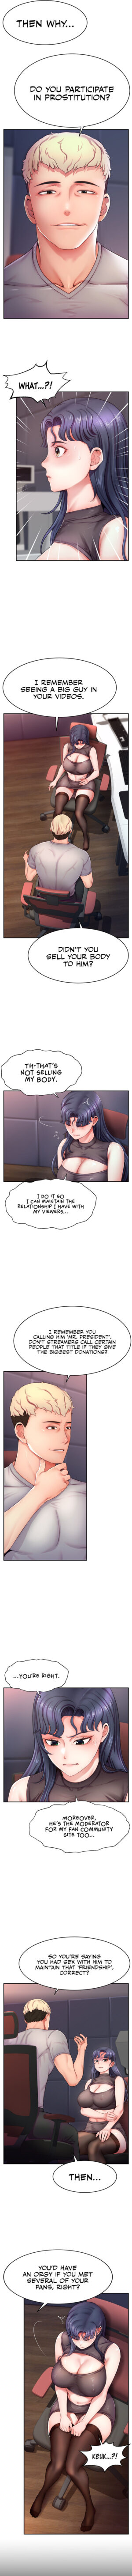 [Ohhhhhk, Boss Racoon] Making Friends With Streamers by Hacking! (1-16) [English] [Omega Scans] [Ongoing]